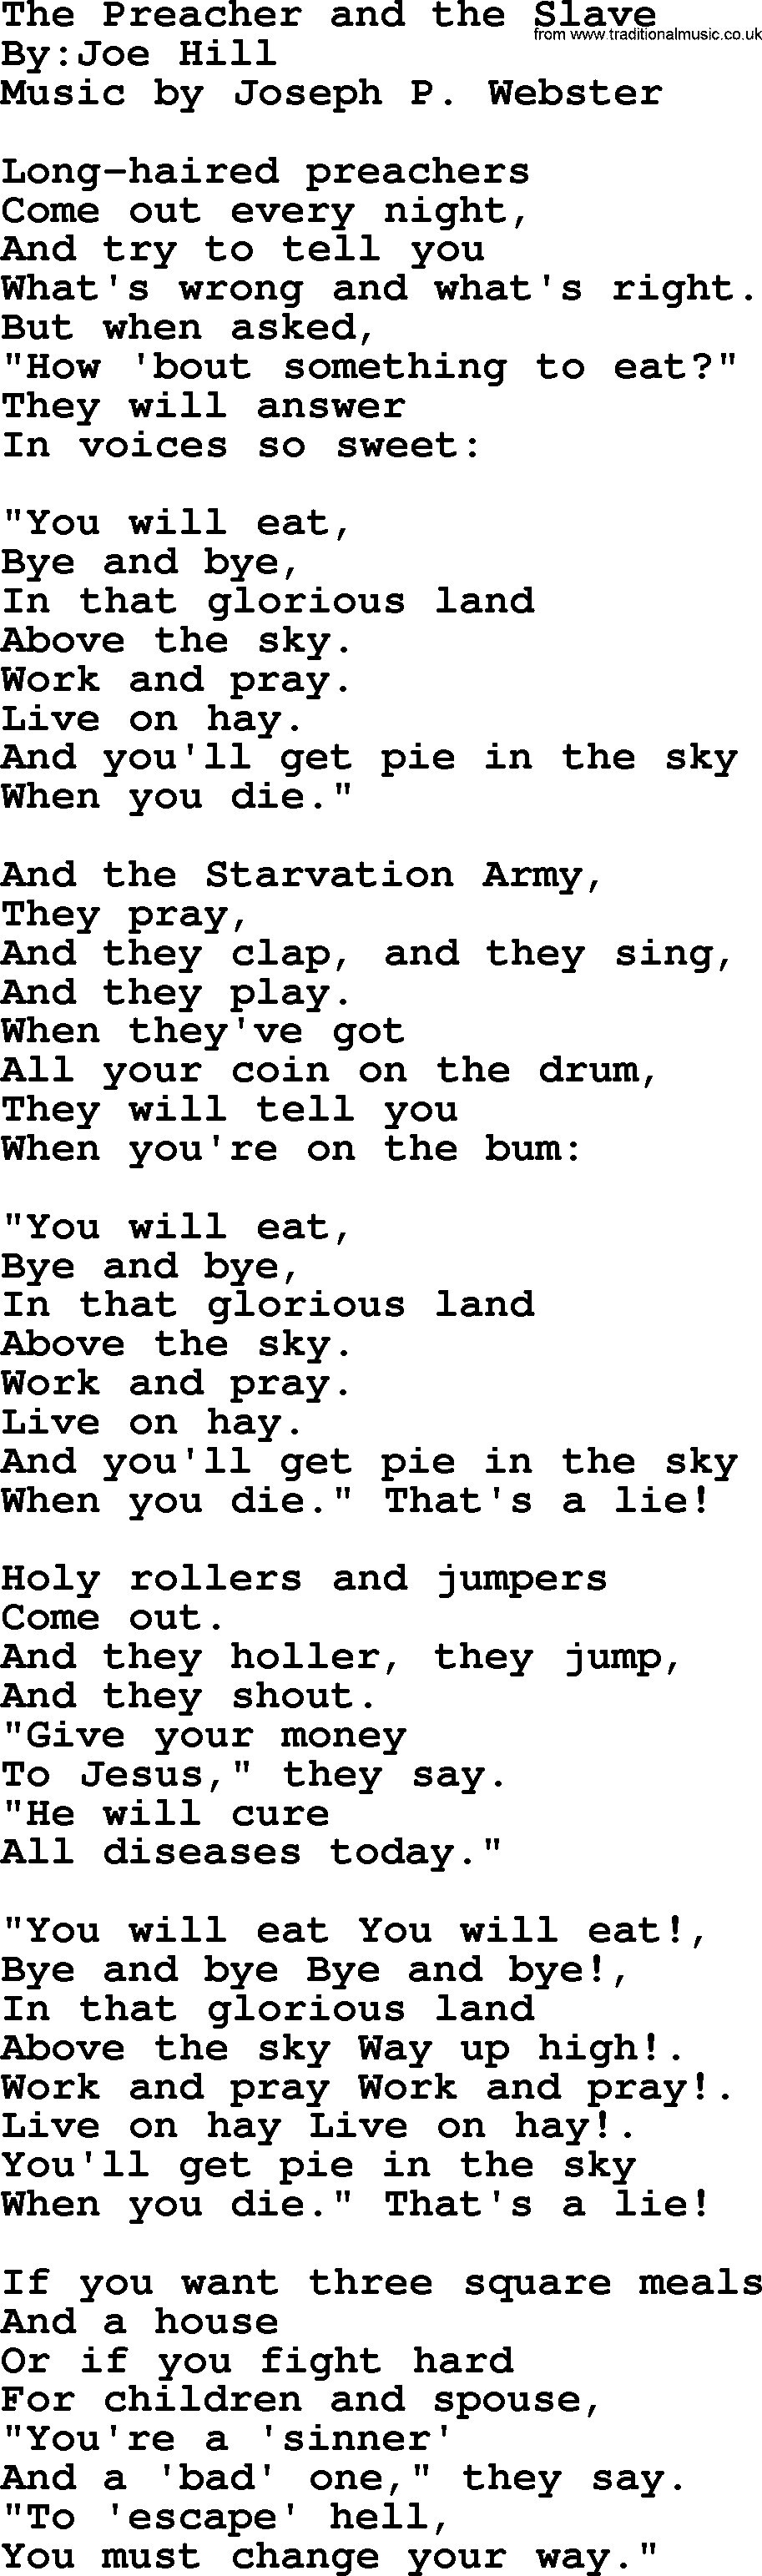 Political, Solidarity, Workers or Union song: The Preacher And The Slave, lyrics